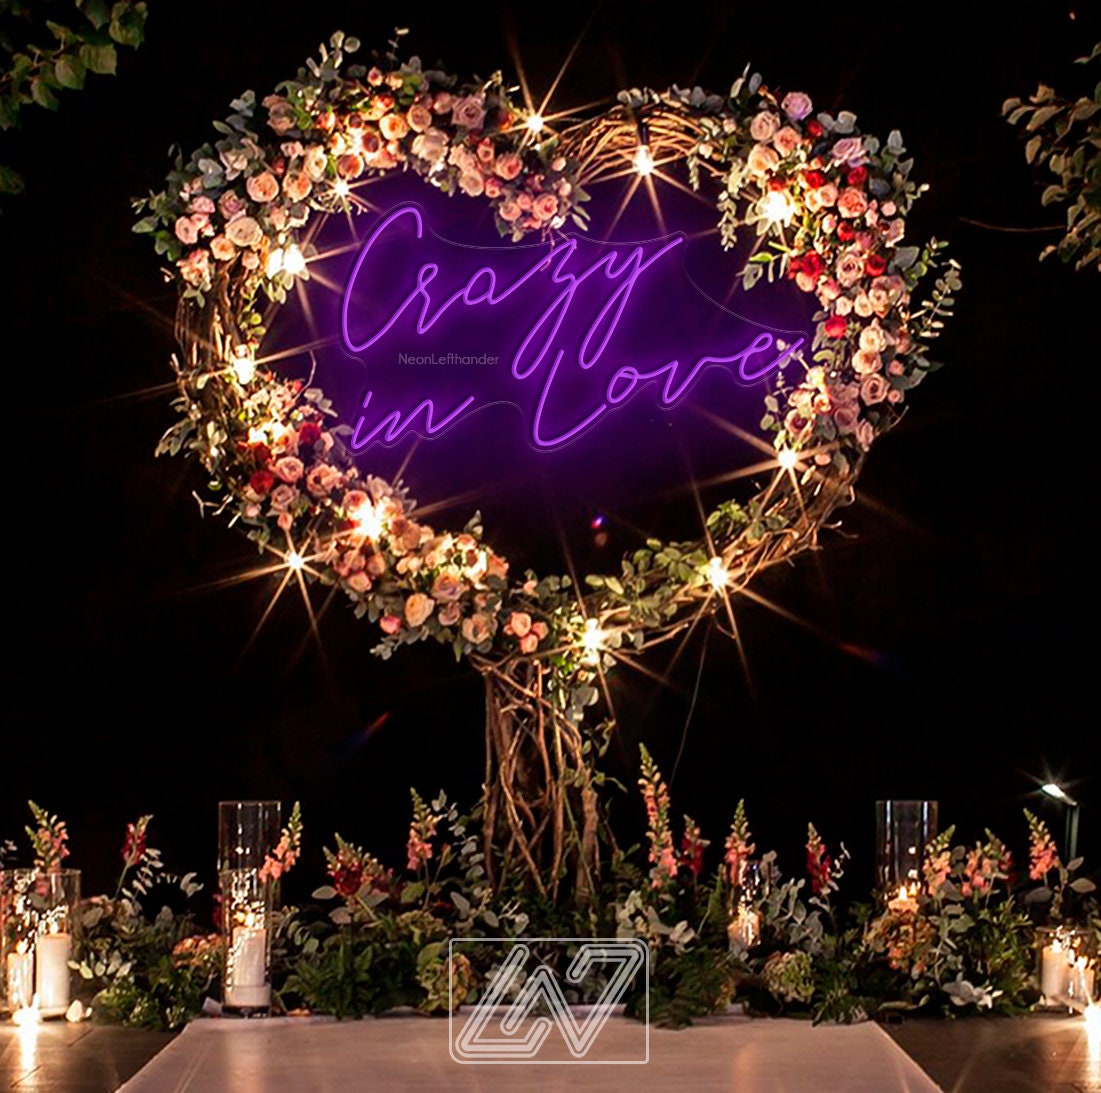 Crazy in Love - LED Neon Sign, Wedding Bride Party Decoration Event Neon Sign Lighting Wall Hanging